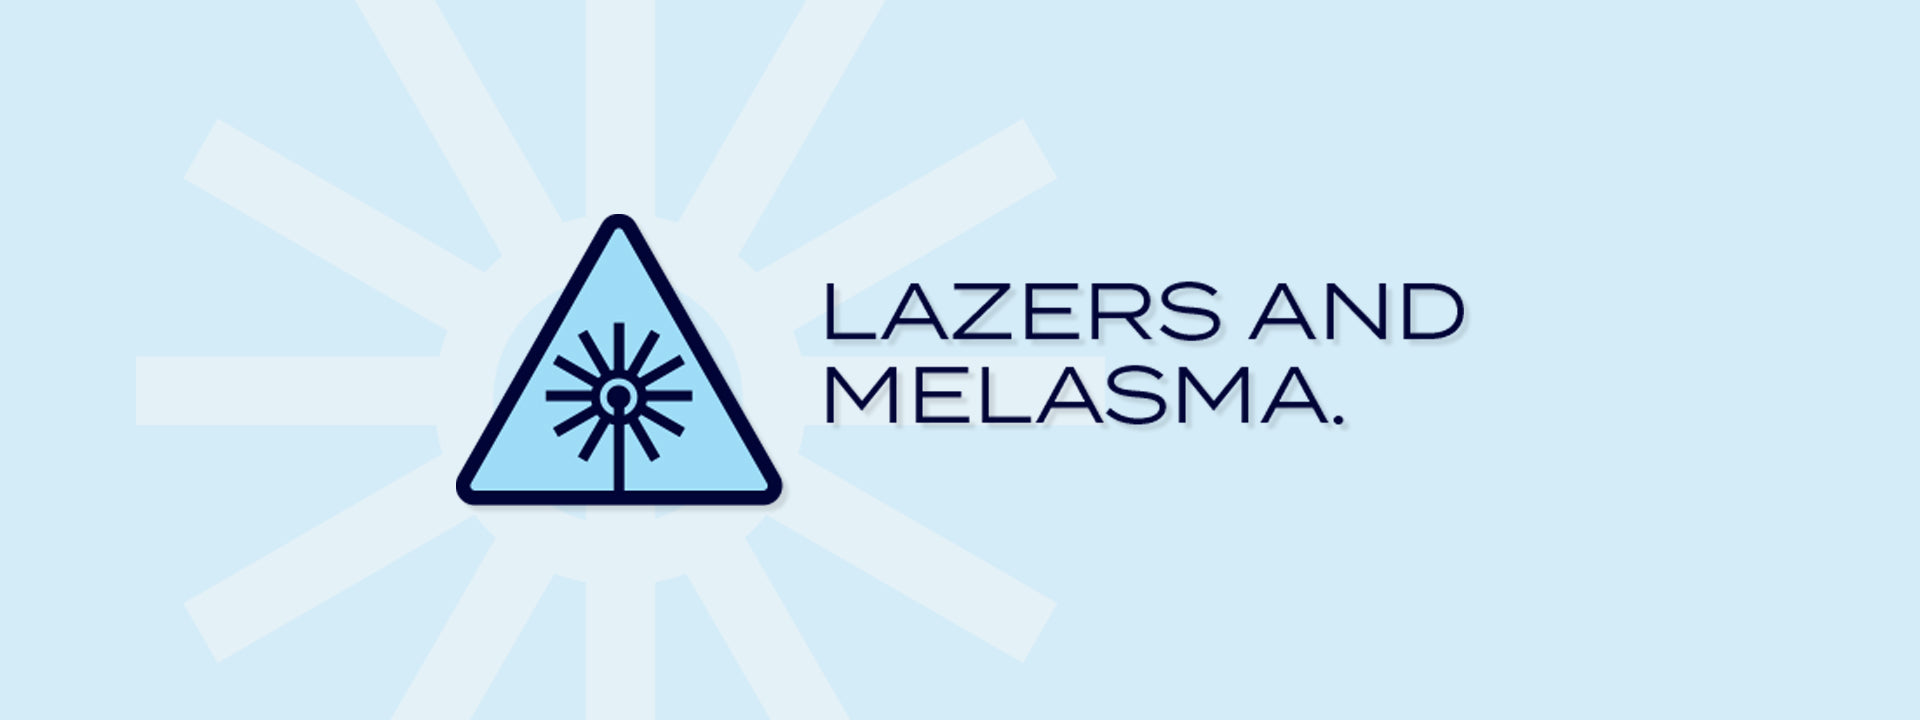 Are lasers safe to use for Melasma?